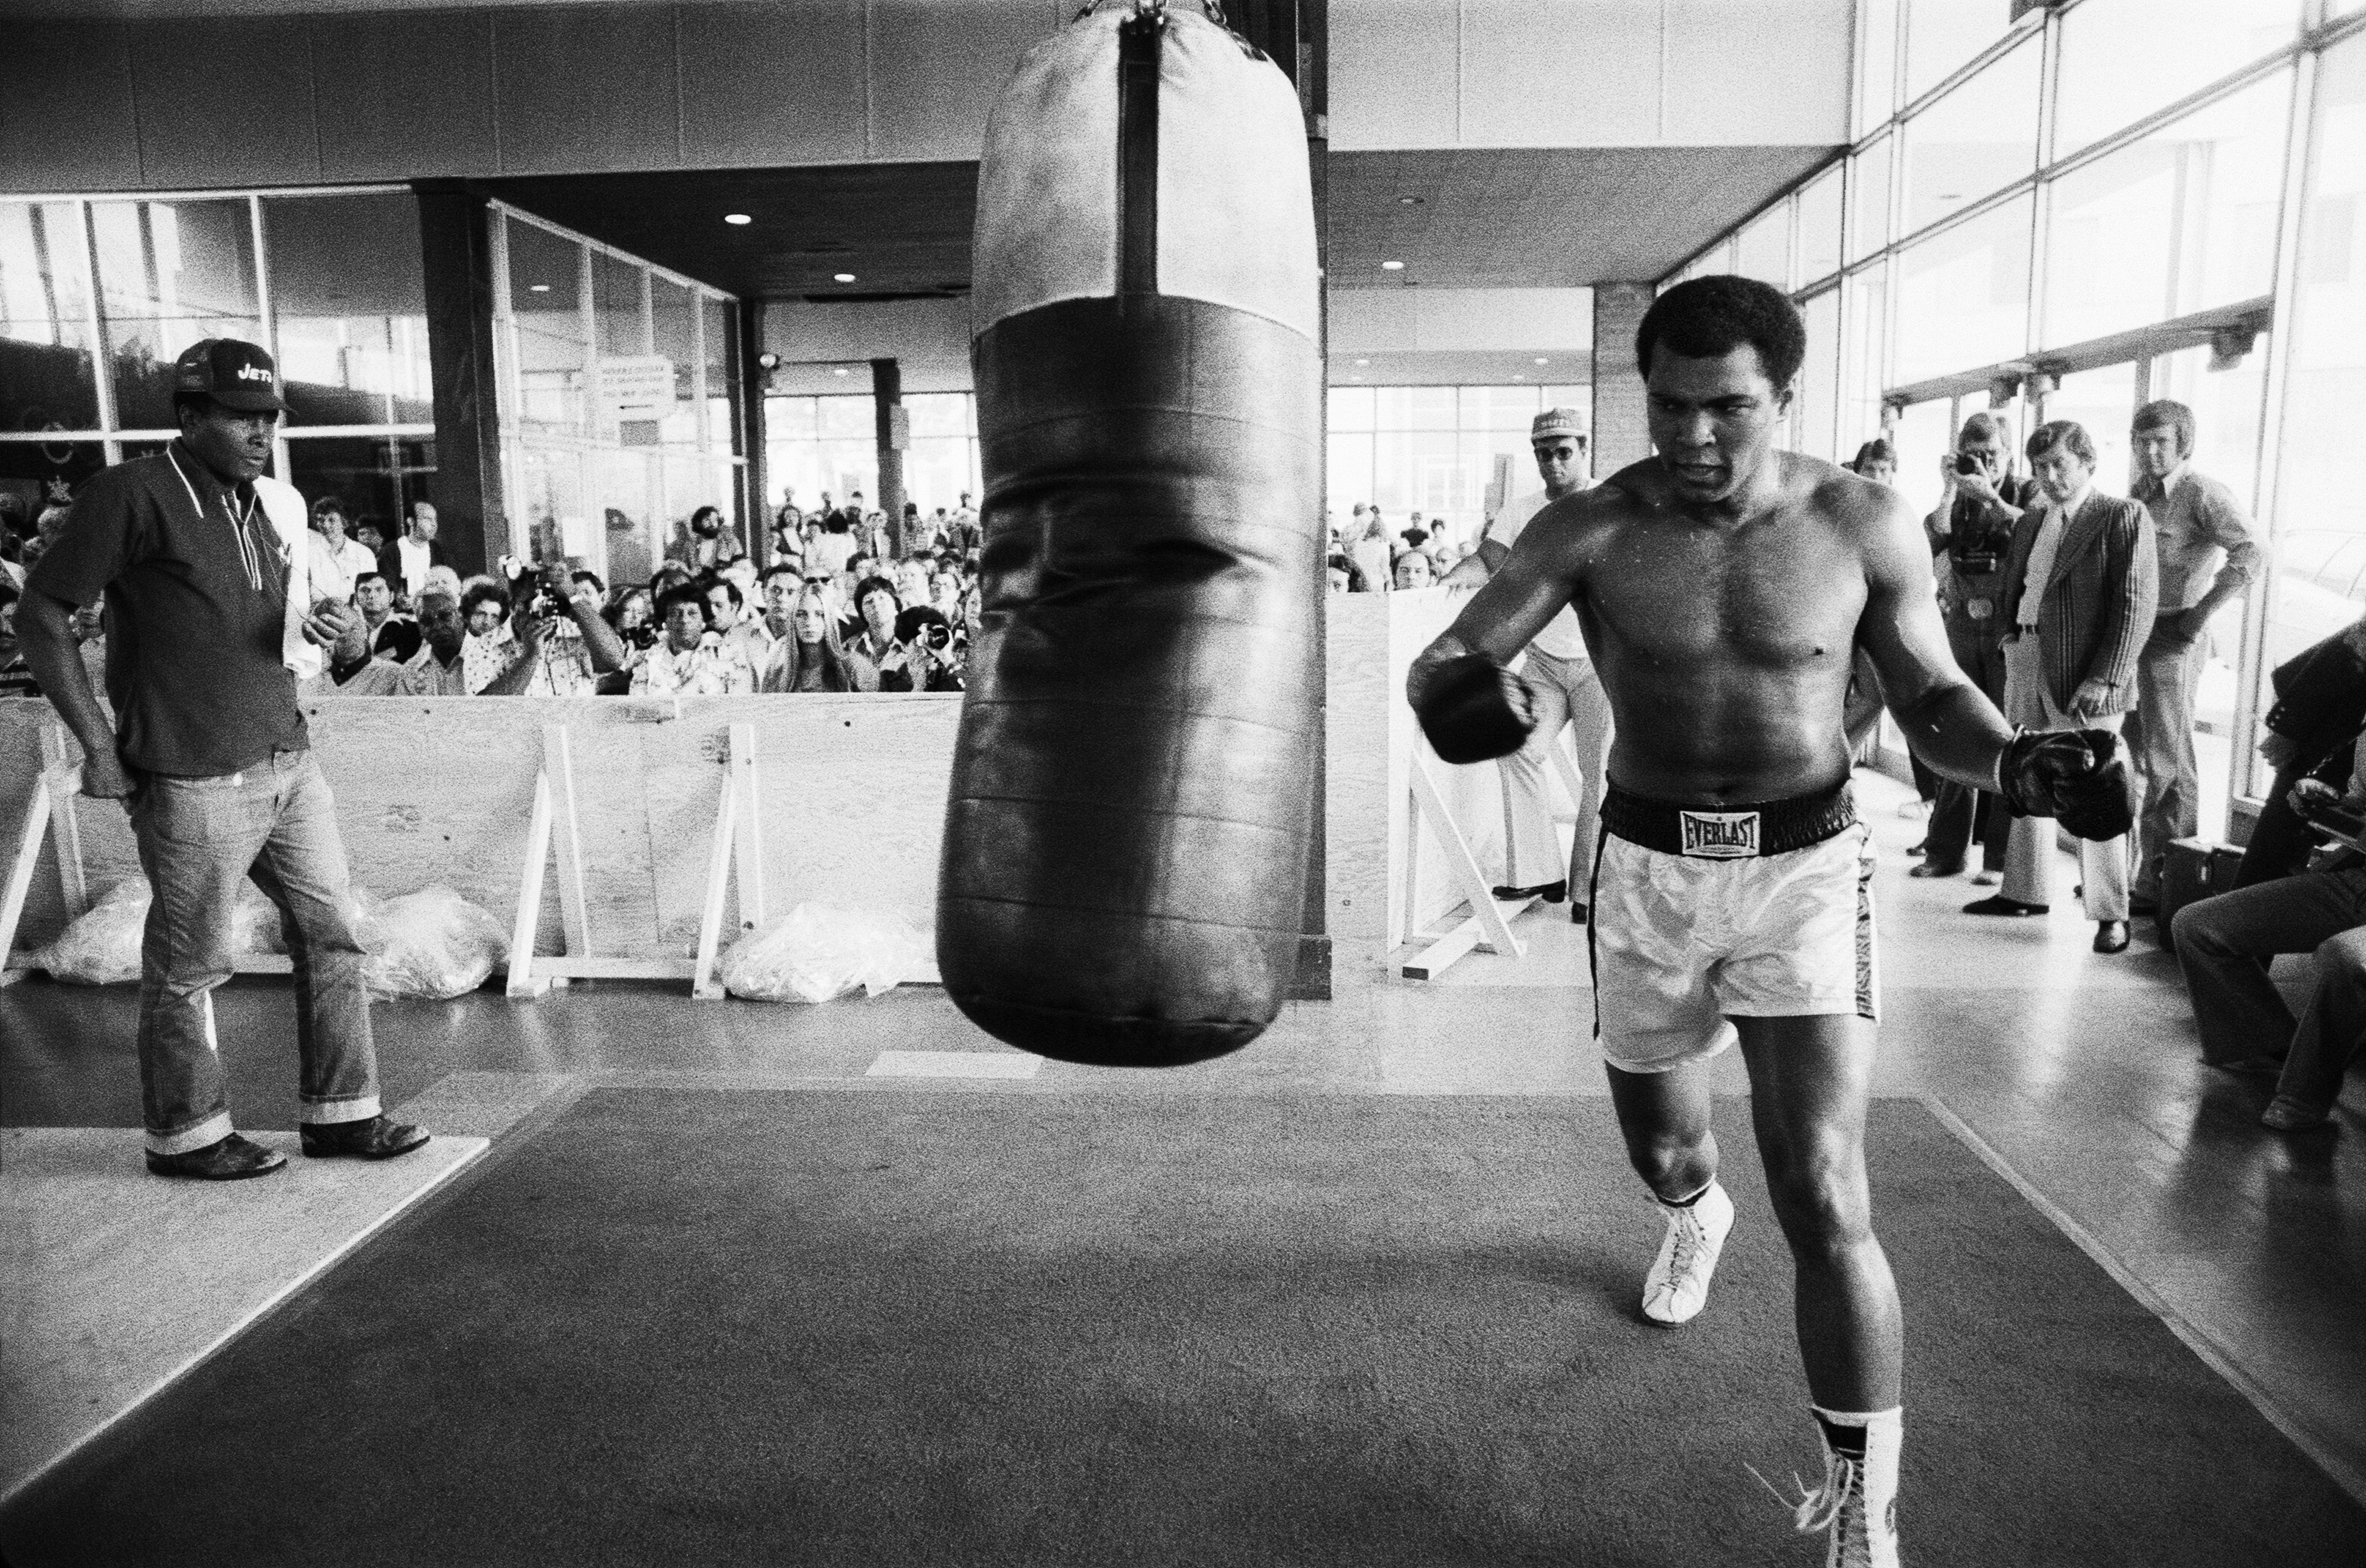 Muhammed Ali trains on a large punching bag at the Concord Hotel in Catskill Mountains with a seated crowd watching from behind a protective wooden barrier.